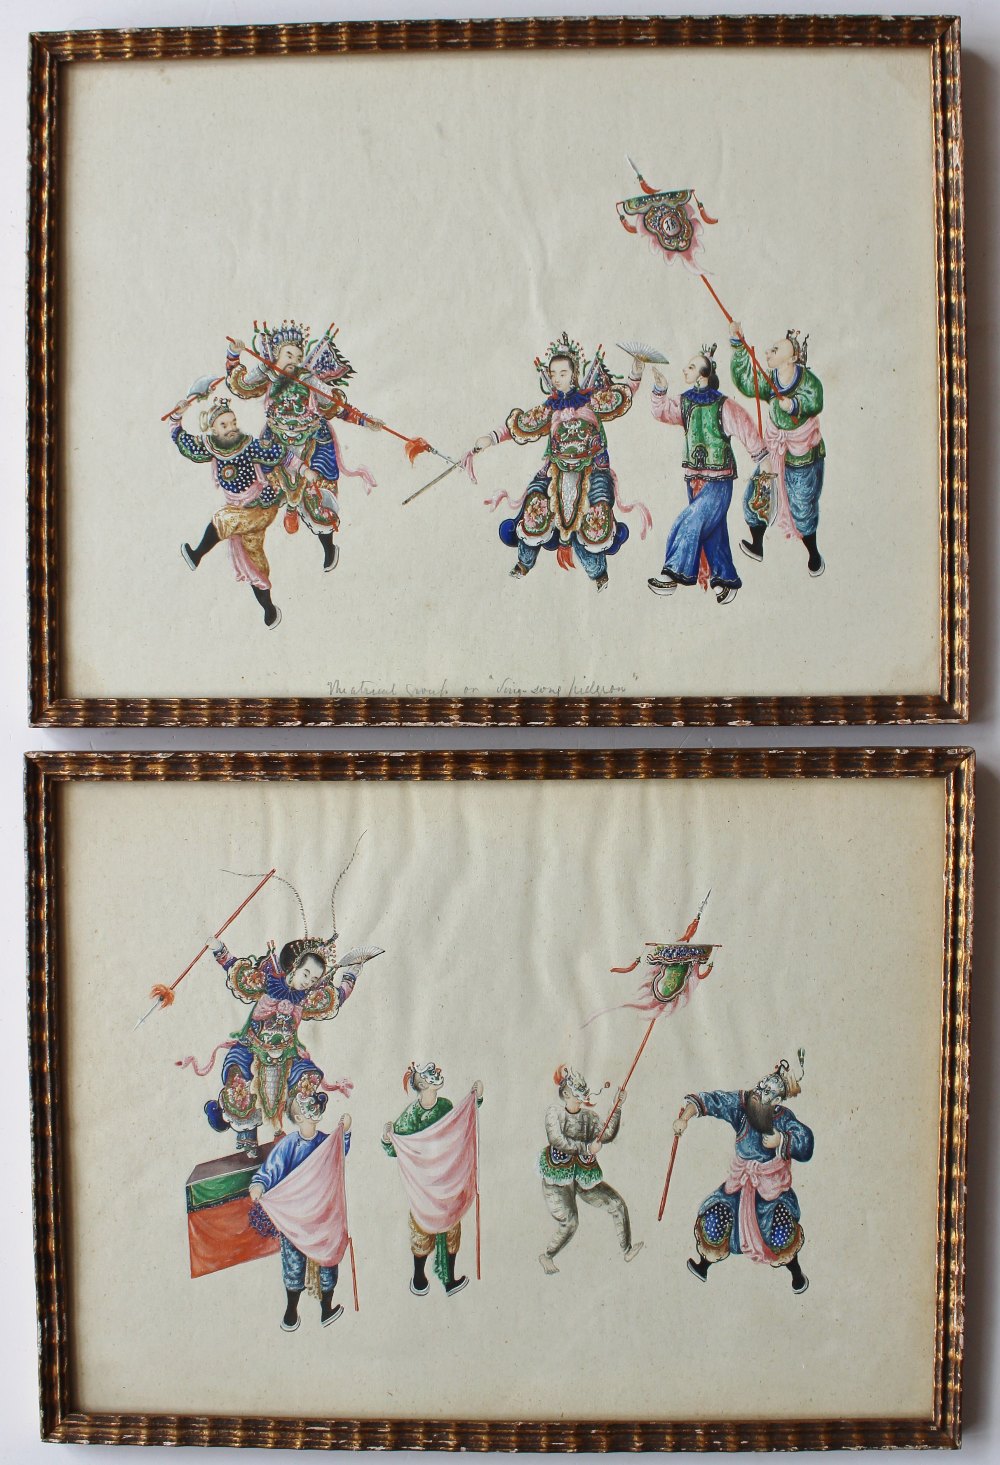 20th century Chinese School
Warriors and dancers
Watercolour
21. - Image 2 of 8